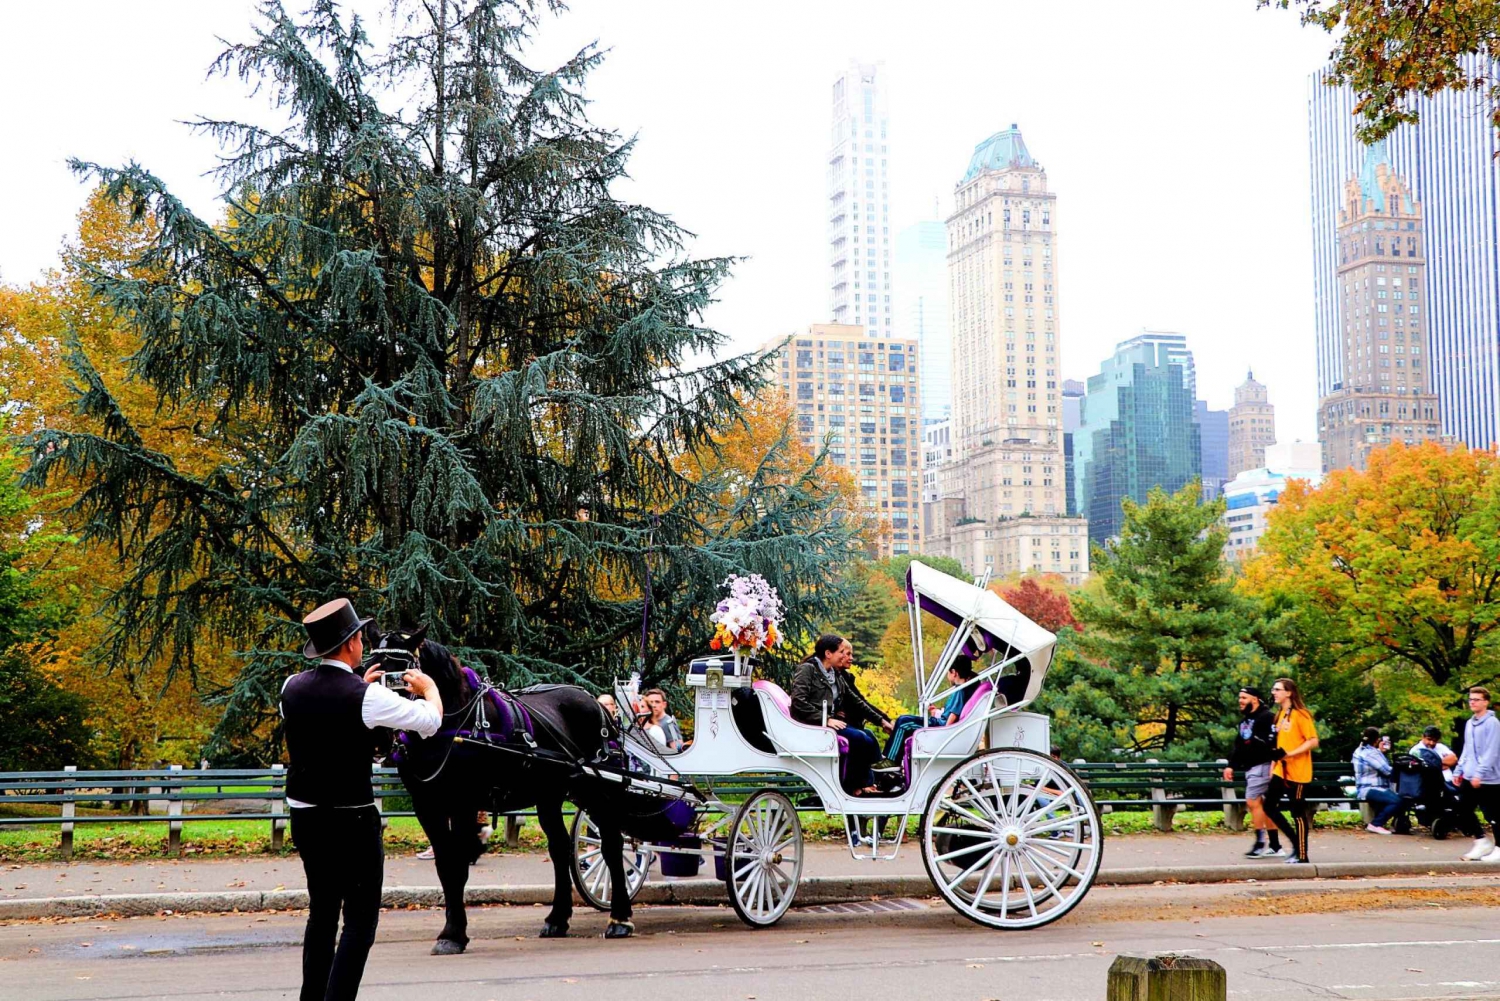 NYC: Central Park Horse-Drawn Carriage Ride (up to 4 Adults)